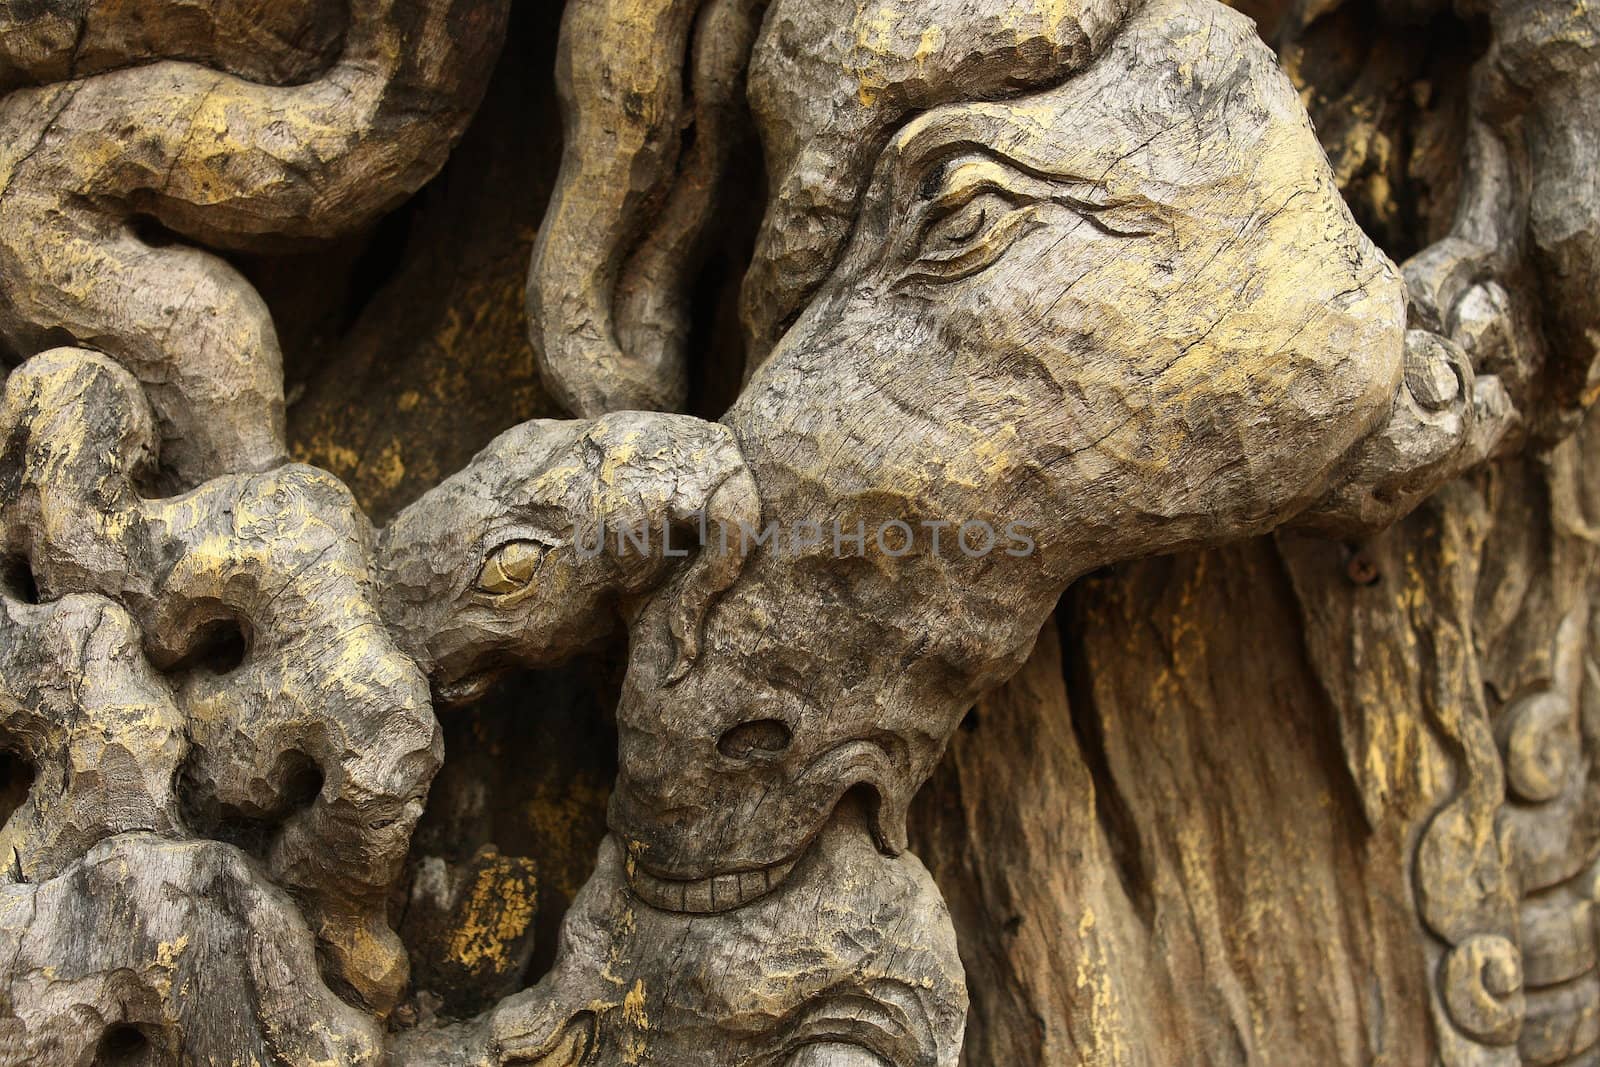 Woodcarving in Thailand - a horse's head by cococinema